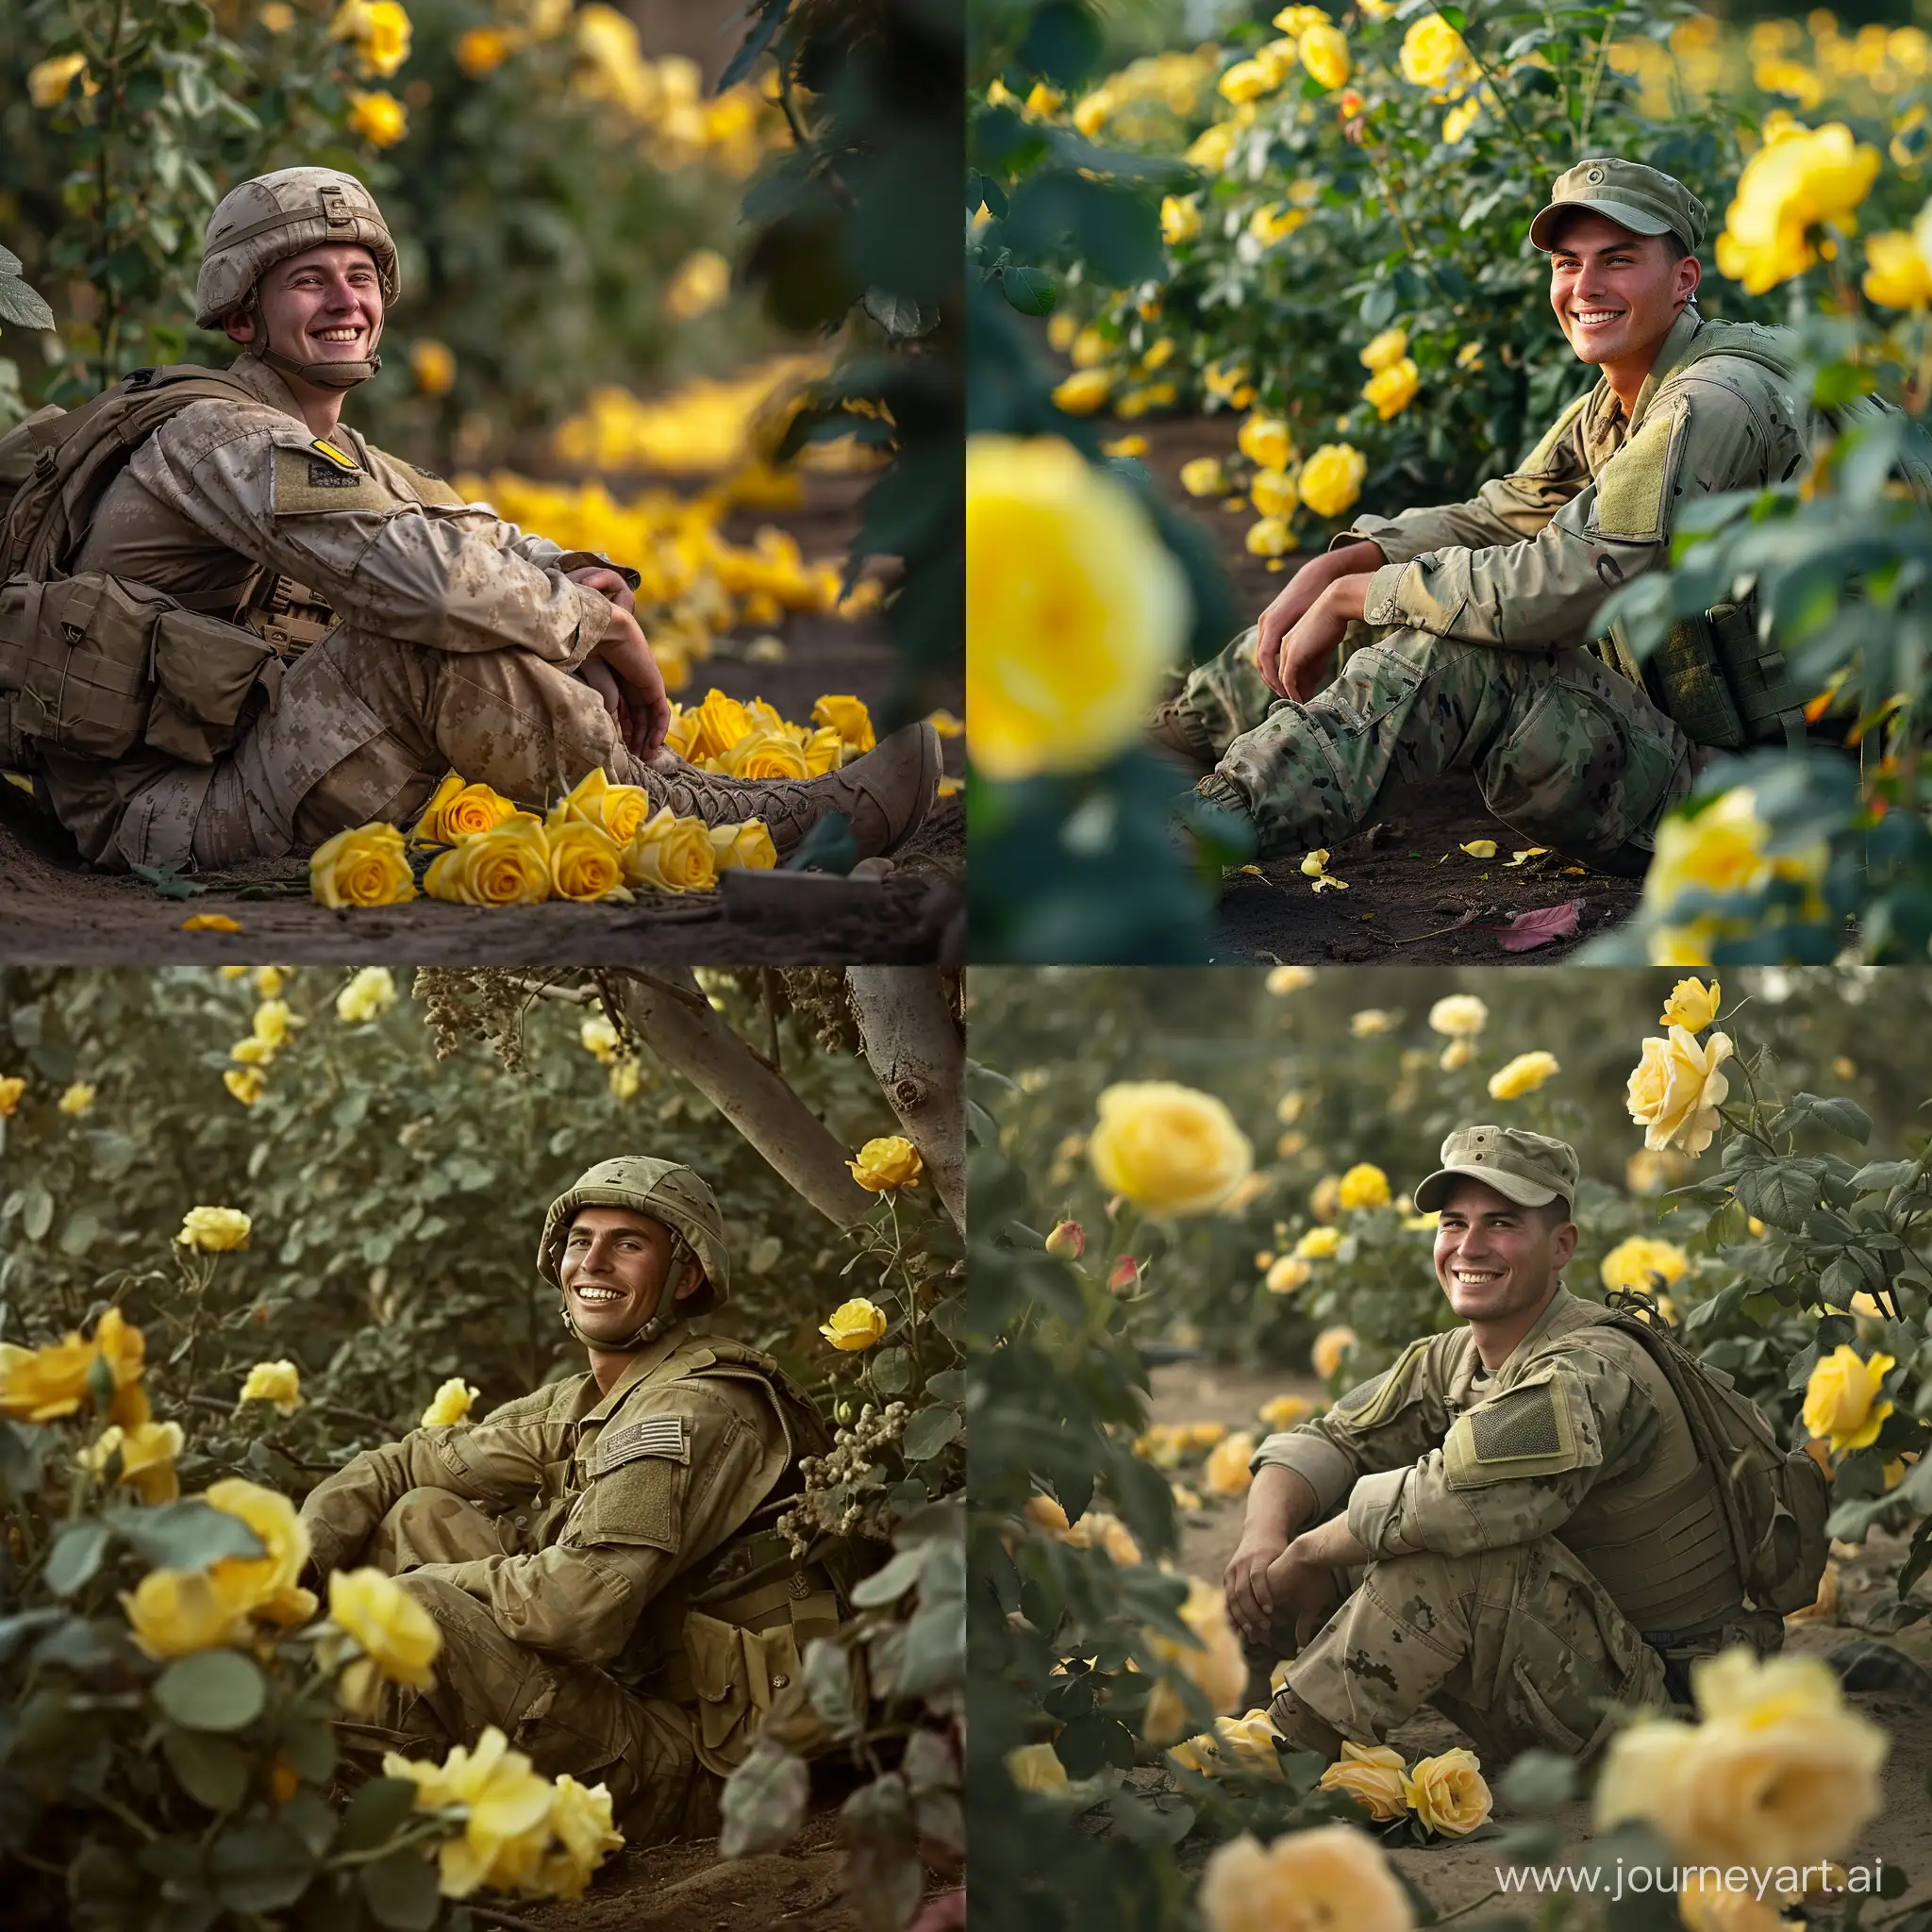 Joyful-Soldier-Relaxing-Amidst-Nature-Surrounded-by-Yellow-Roses